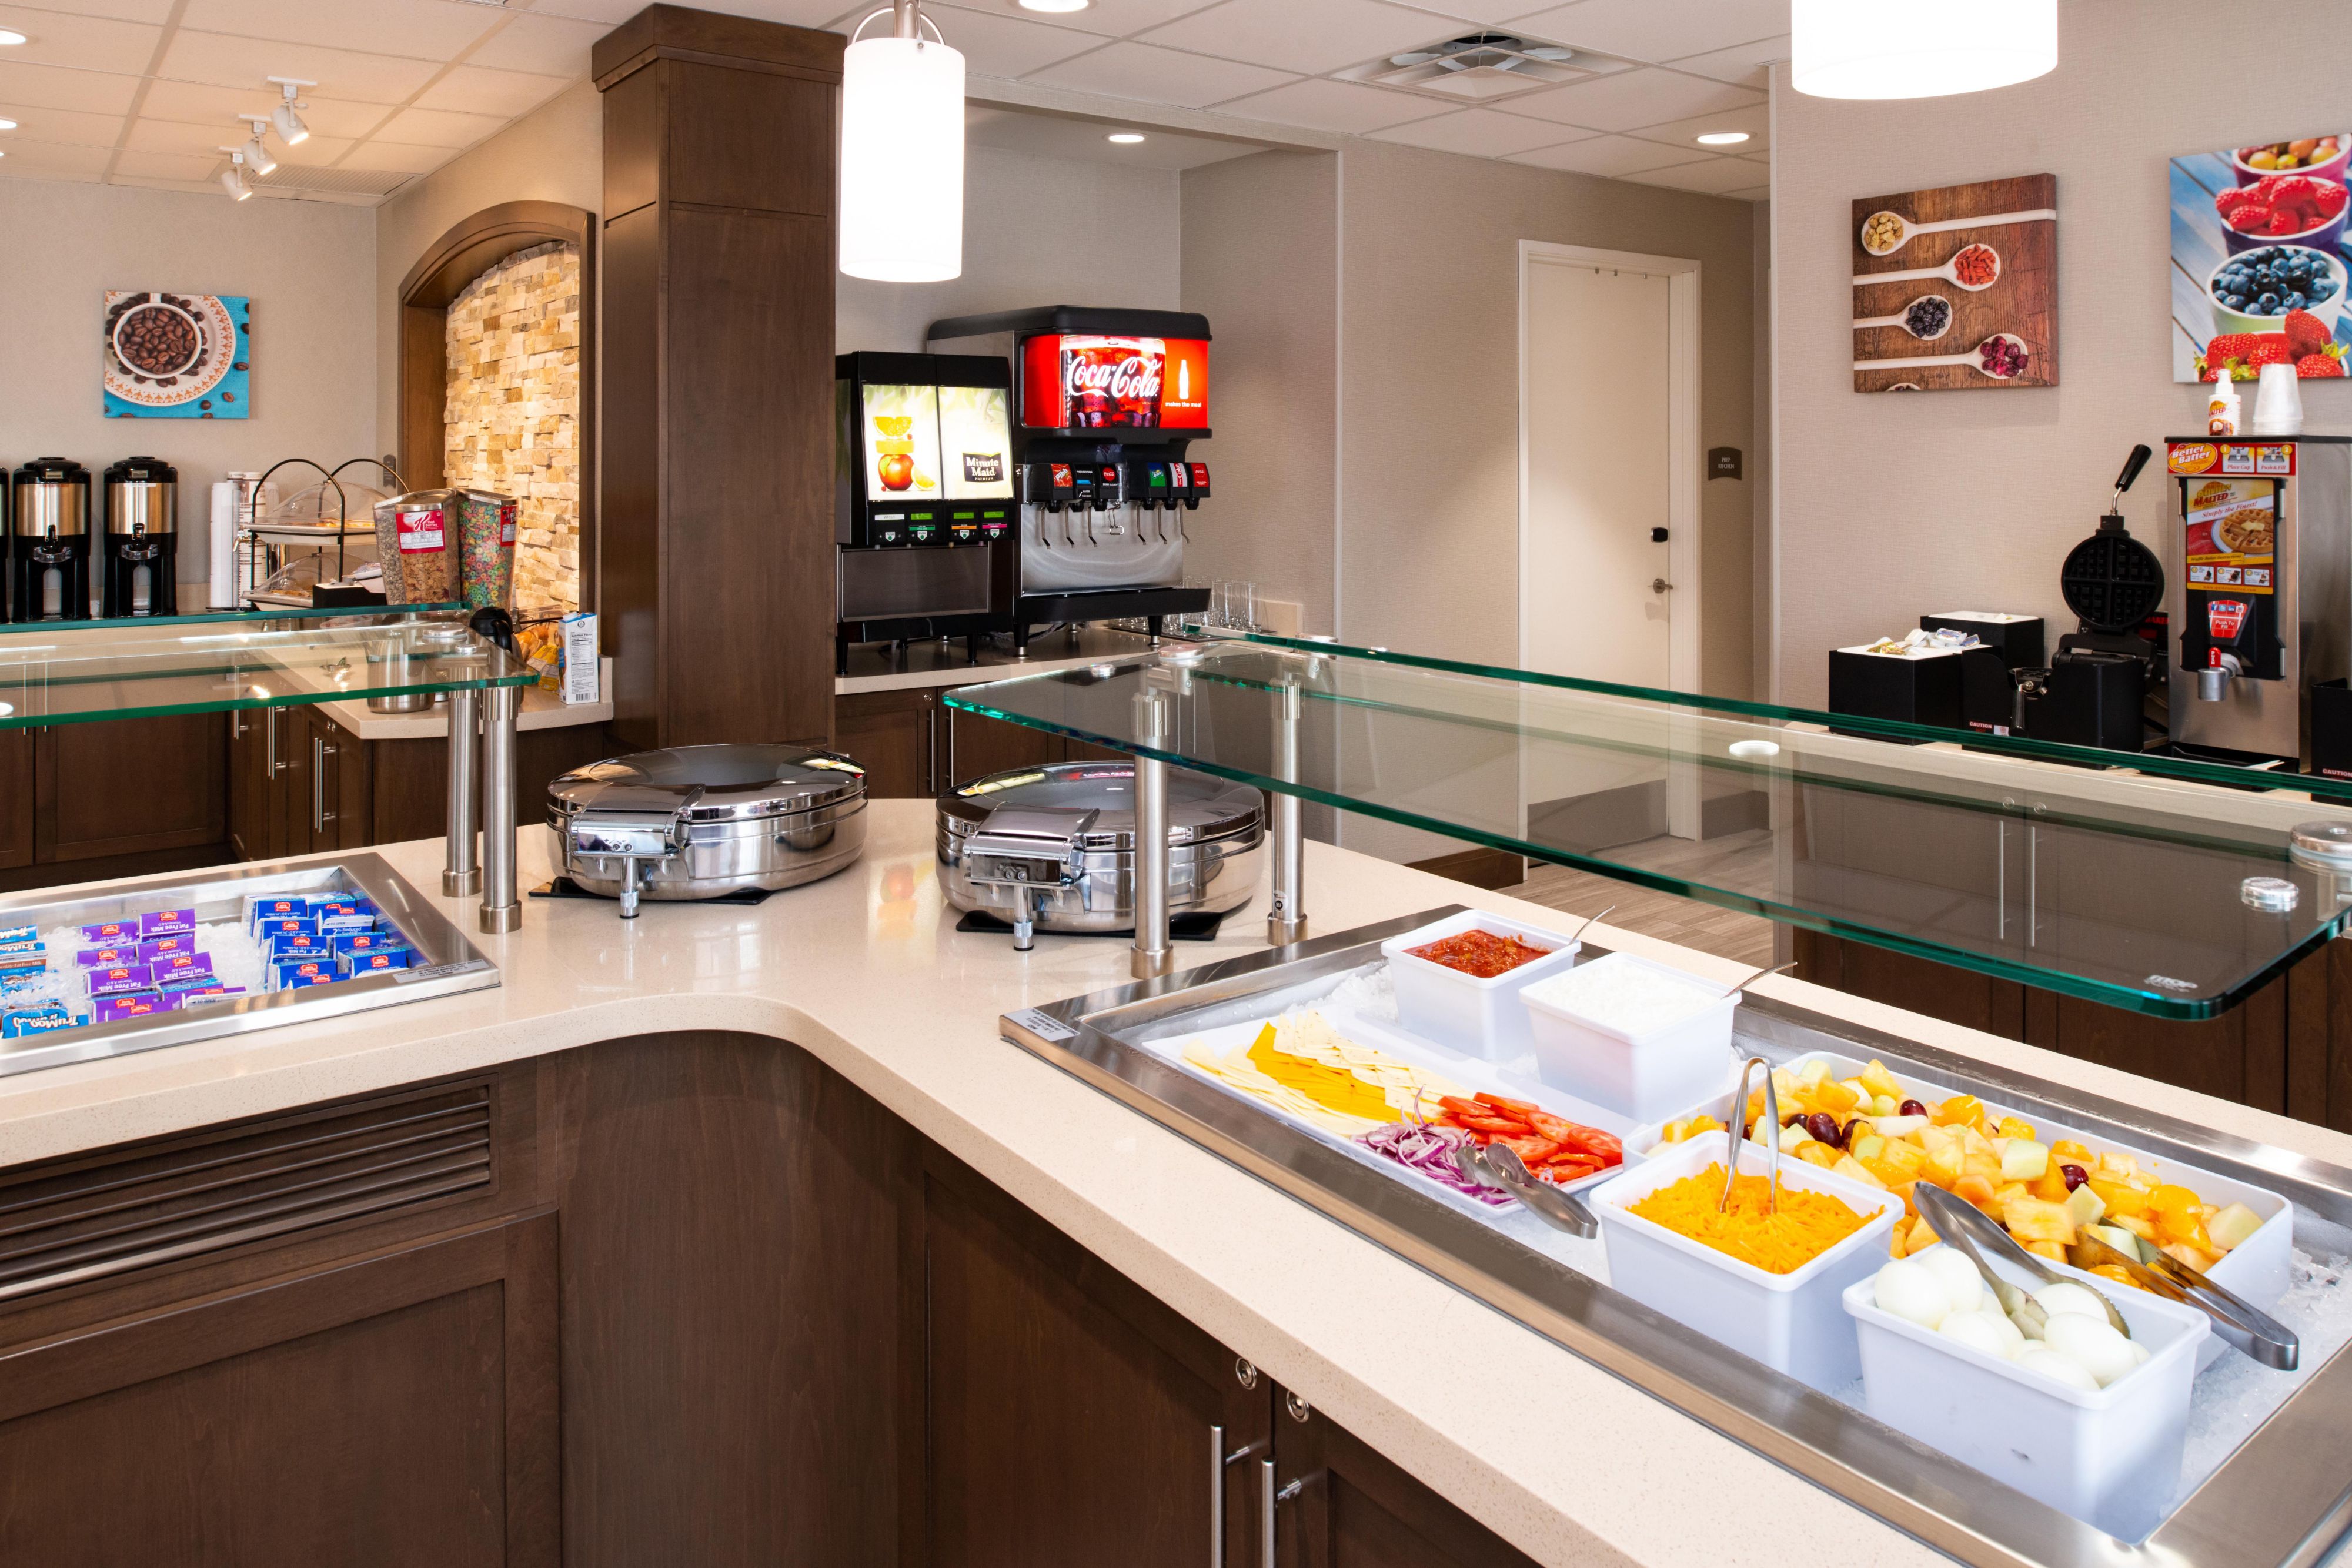 Enjoy a Complimentary Hot Breakfast when you stay at Staybridge Suites St. George. With daily selections of eggs, sausage or bacon, yogurt parfait station or make your own waffle station. We also offer cereals, bread, blueberry muffins, oatmeal and more. You will easily be satisfied every day.